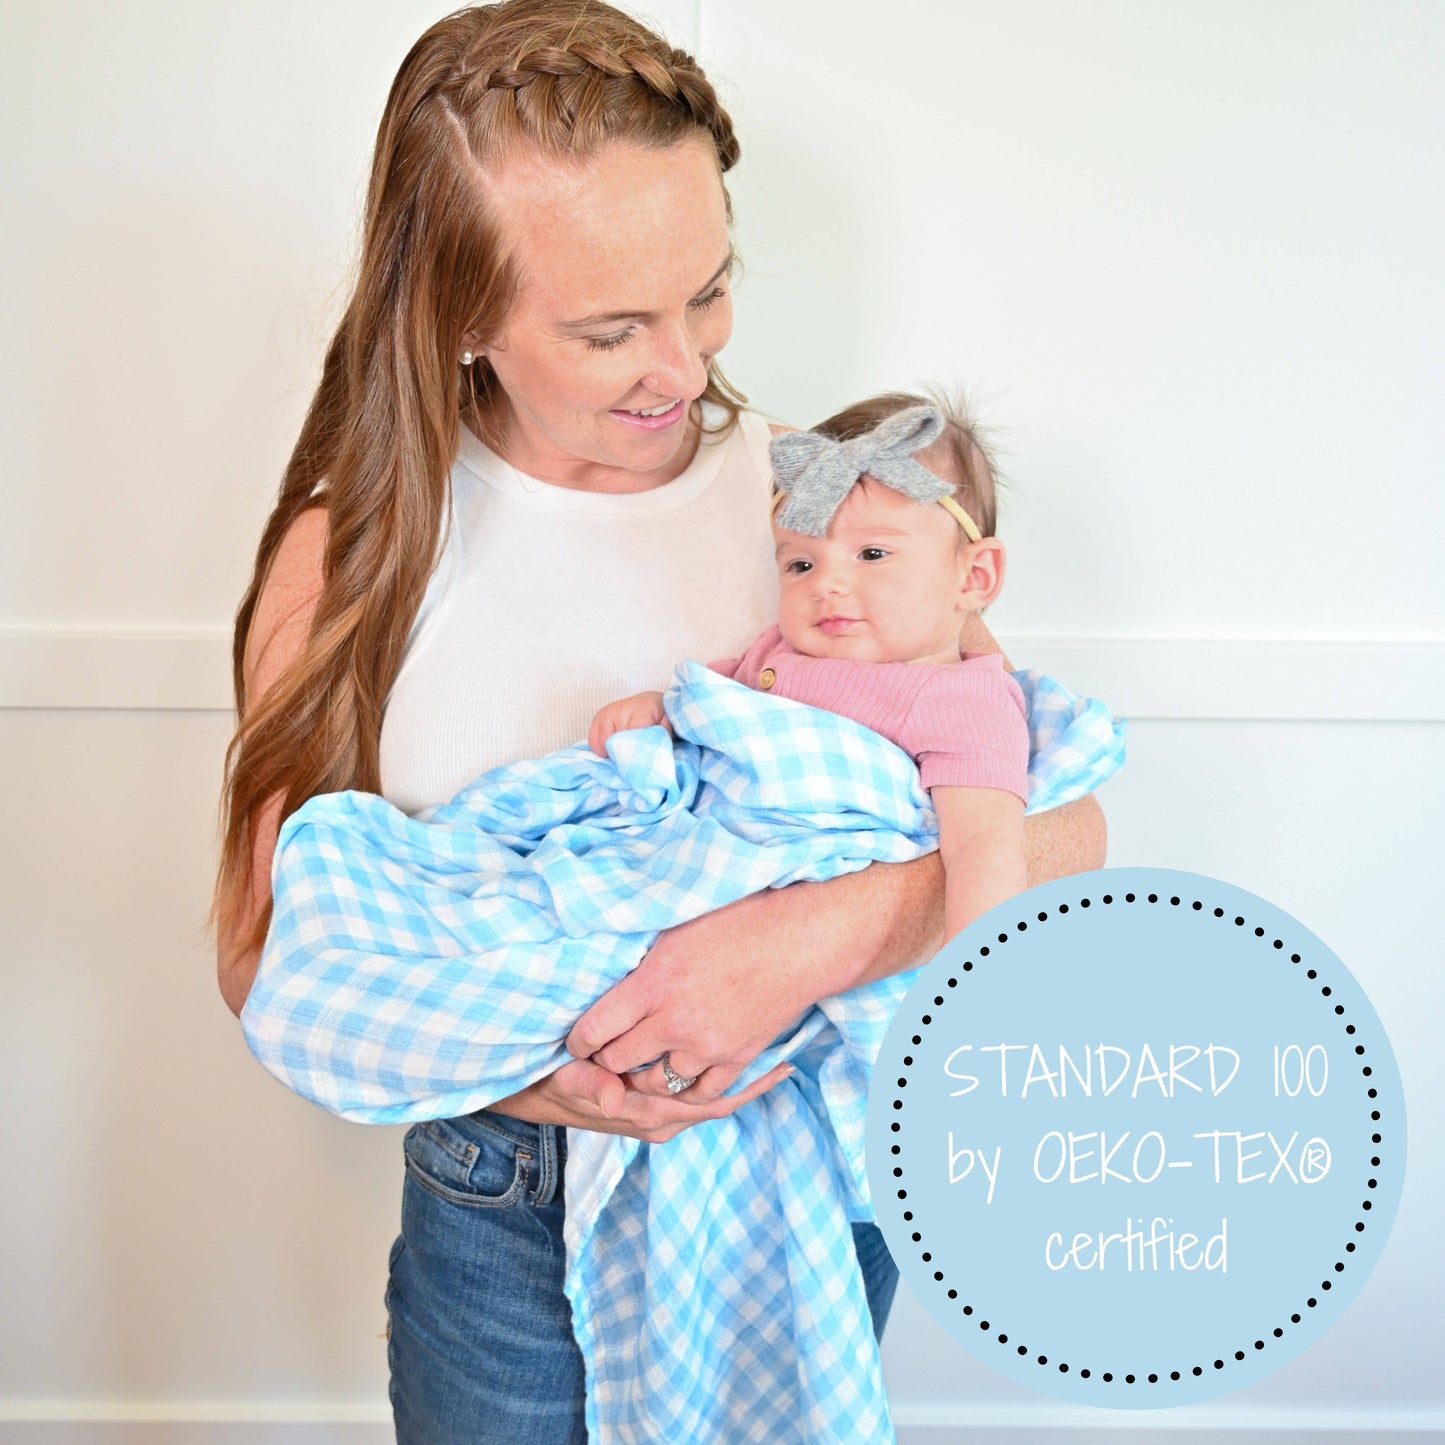 Gingham Style Baby Muslin Cotton Blanket